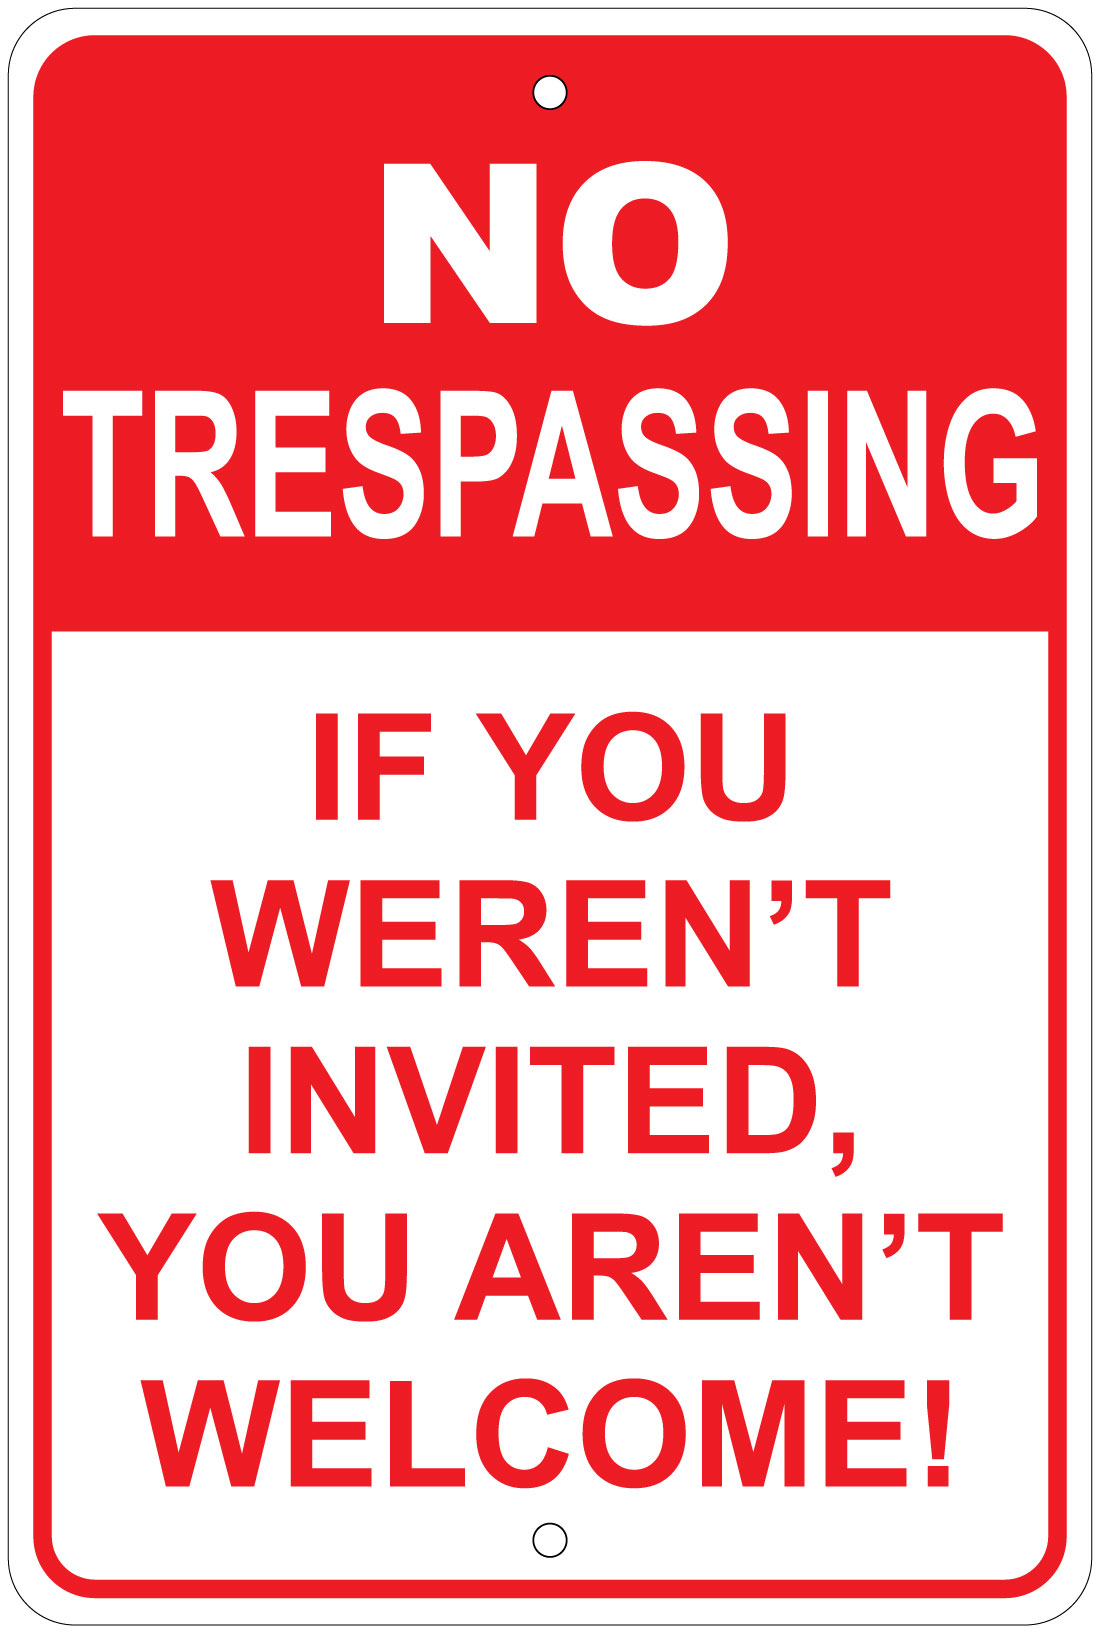 No Trespassing If You Werent Invitedyoure Not Welcome 8x12